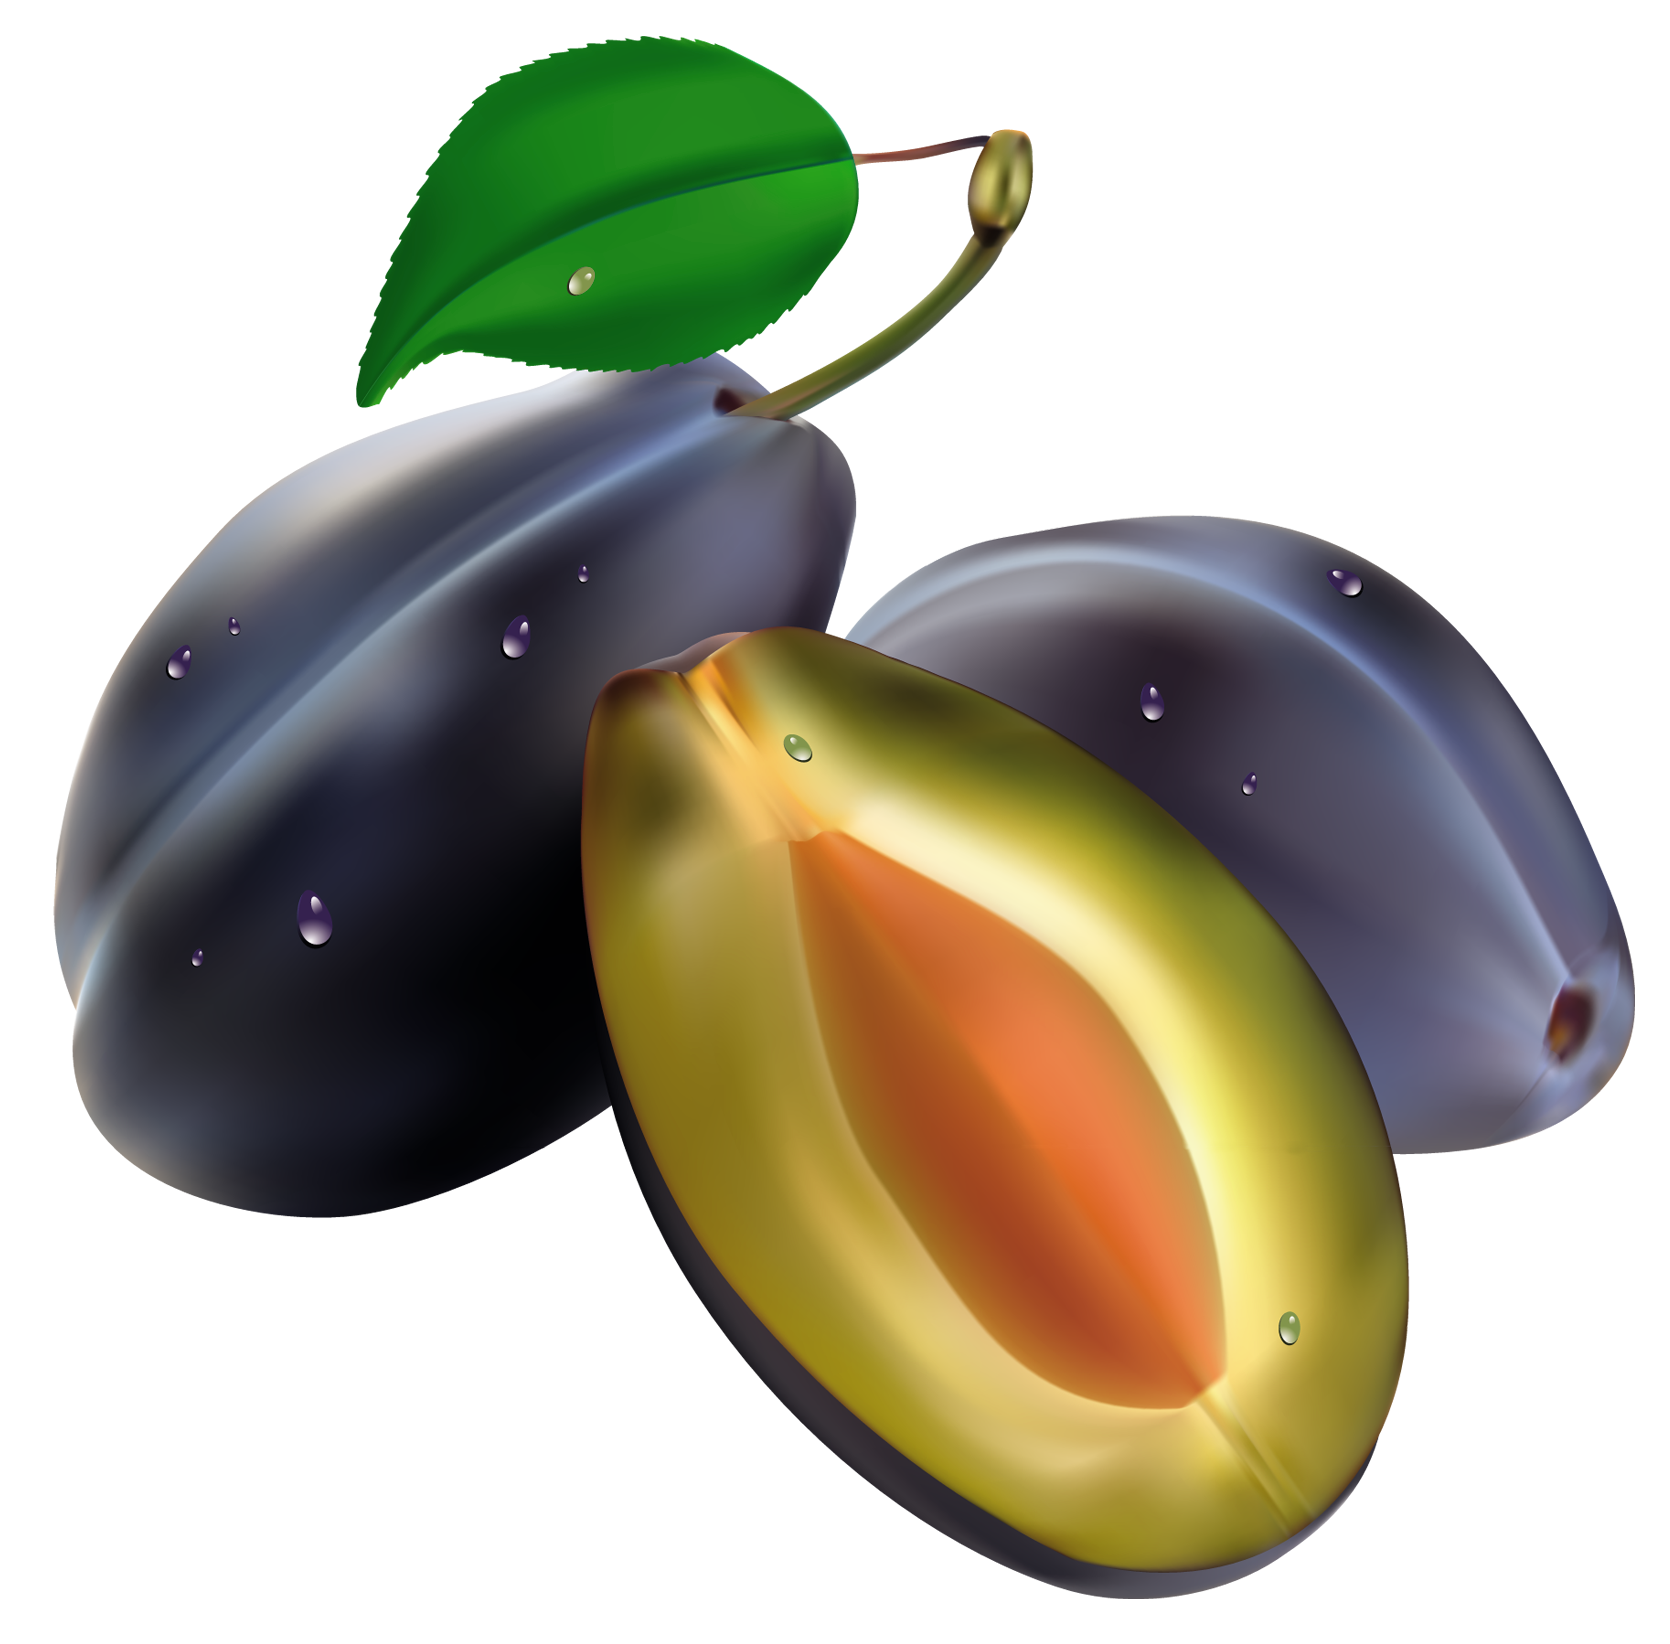 Plum PNG images Download